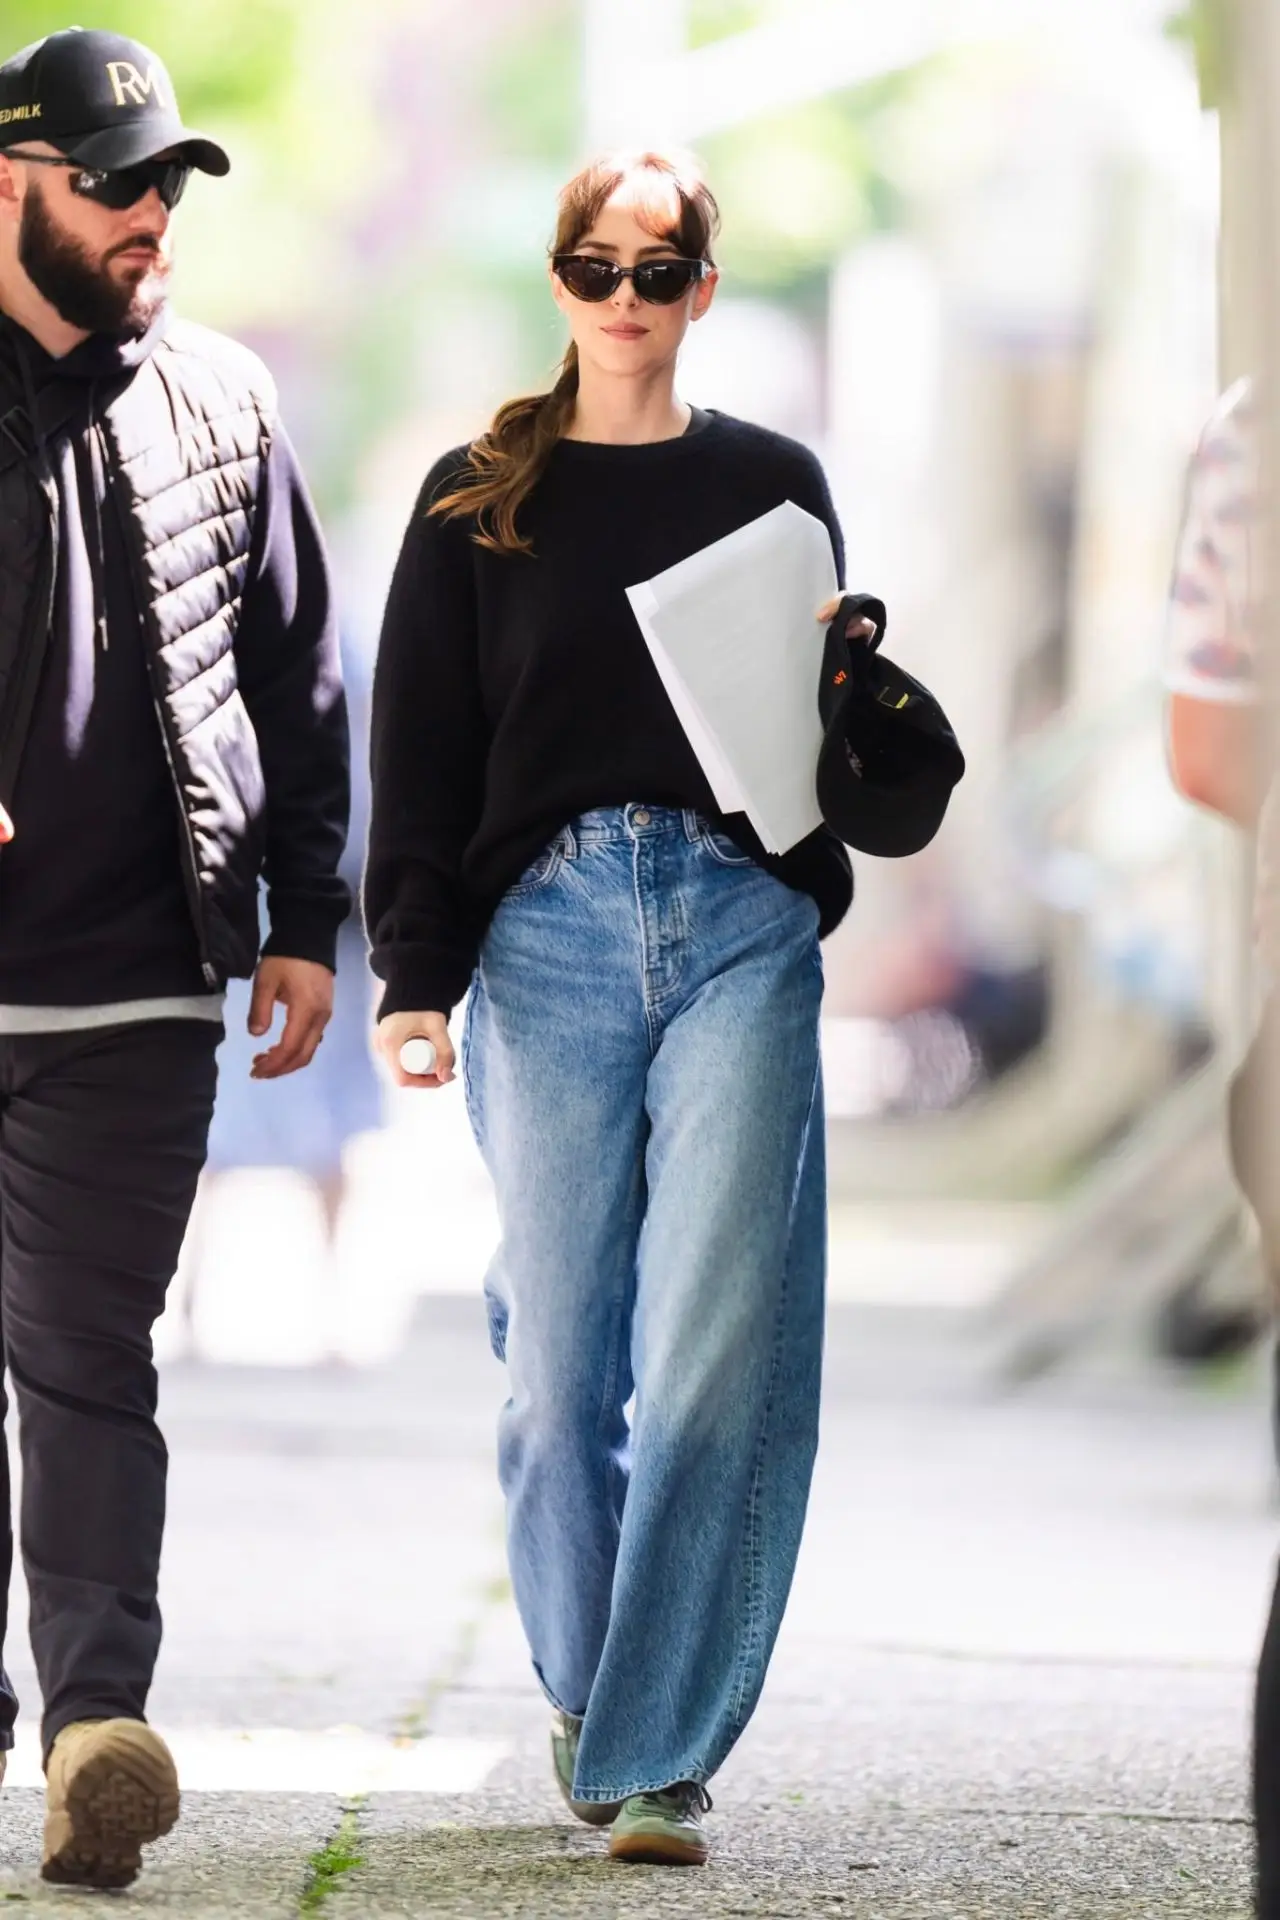 DAKOTA JOHNSON AT THE MOVIE SET OF THE MATERIALISTS IN NEW YORK13